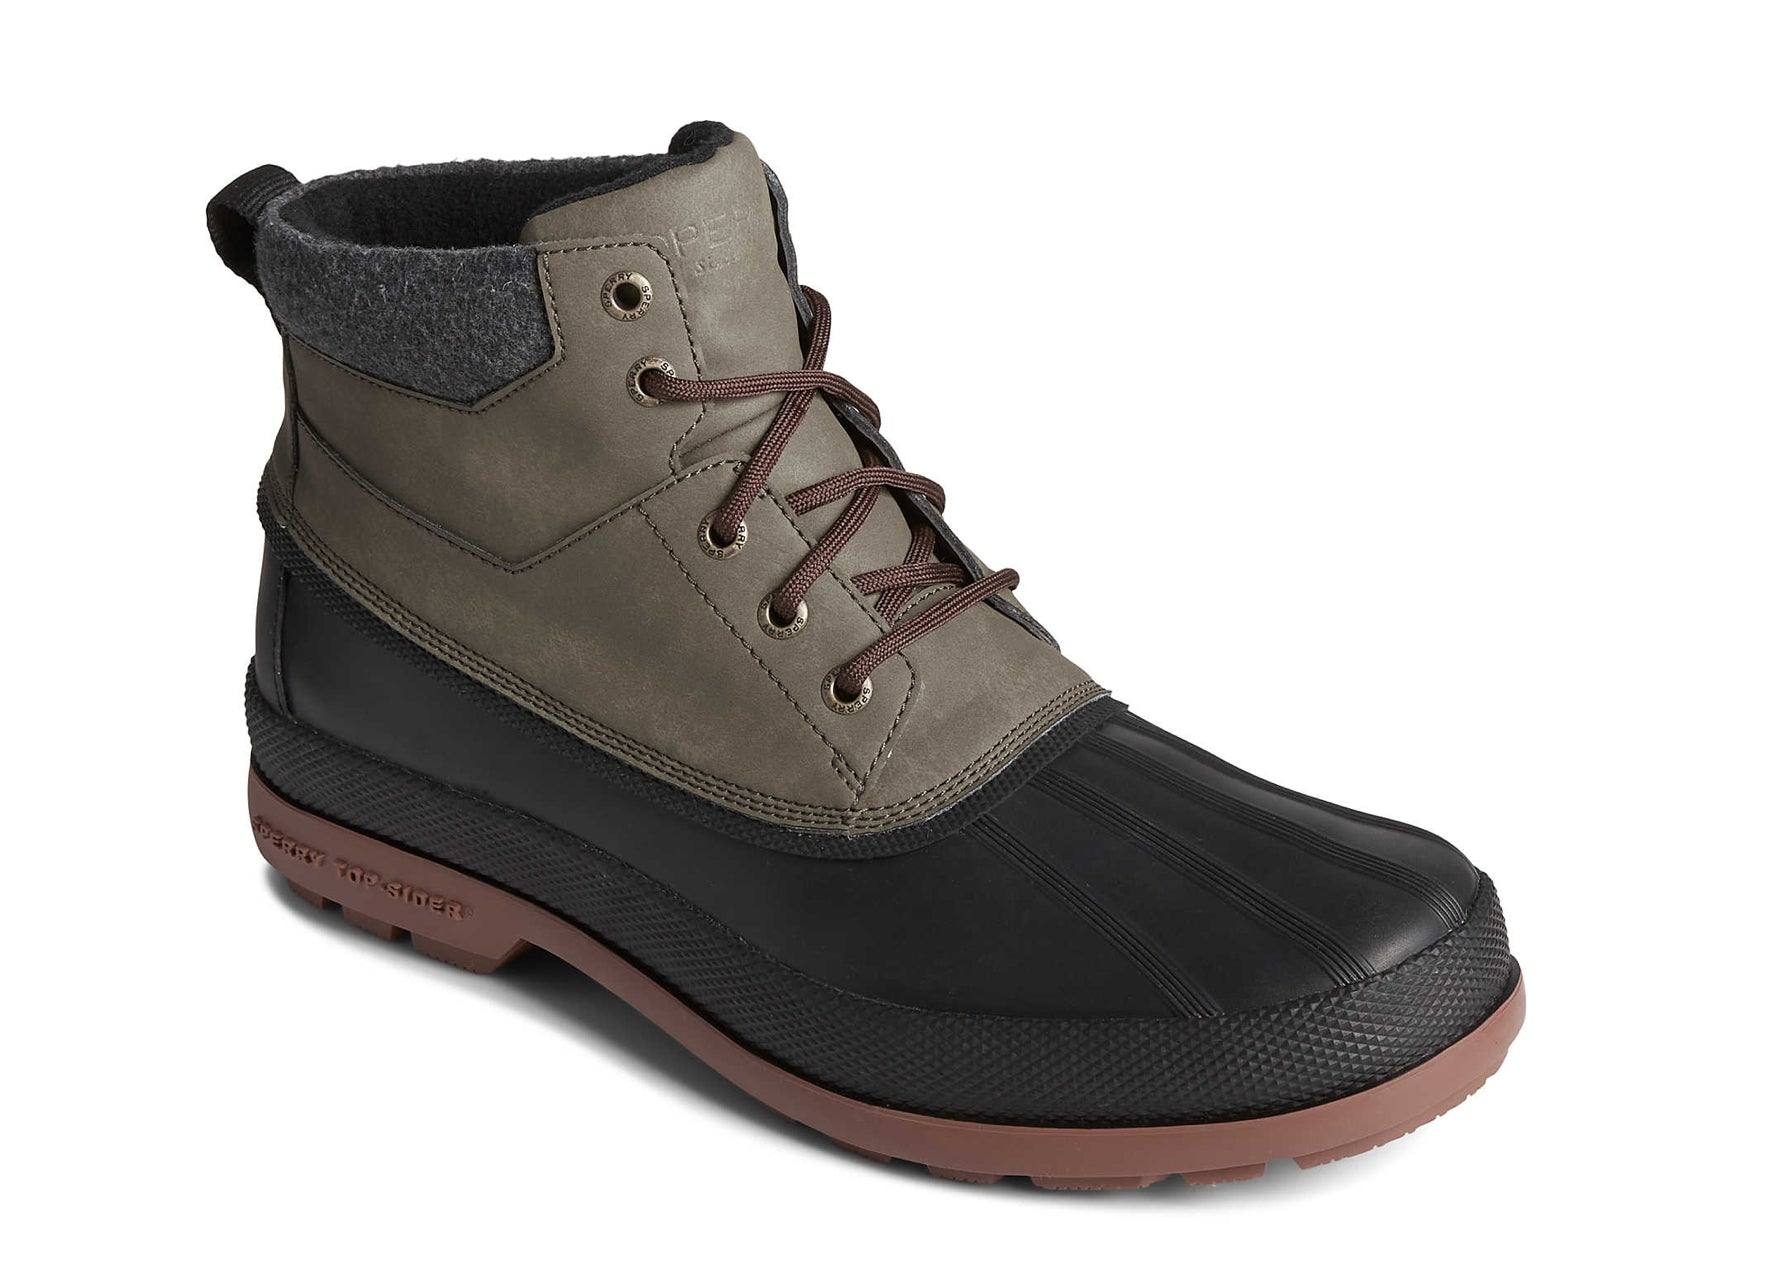 Men’s Cold Bay Waterproof Chukka Boot - The Shoe CollectiveSperry